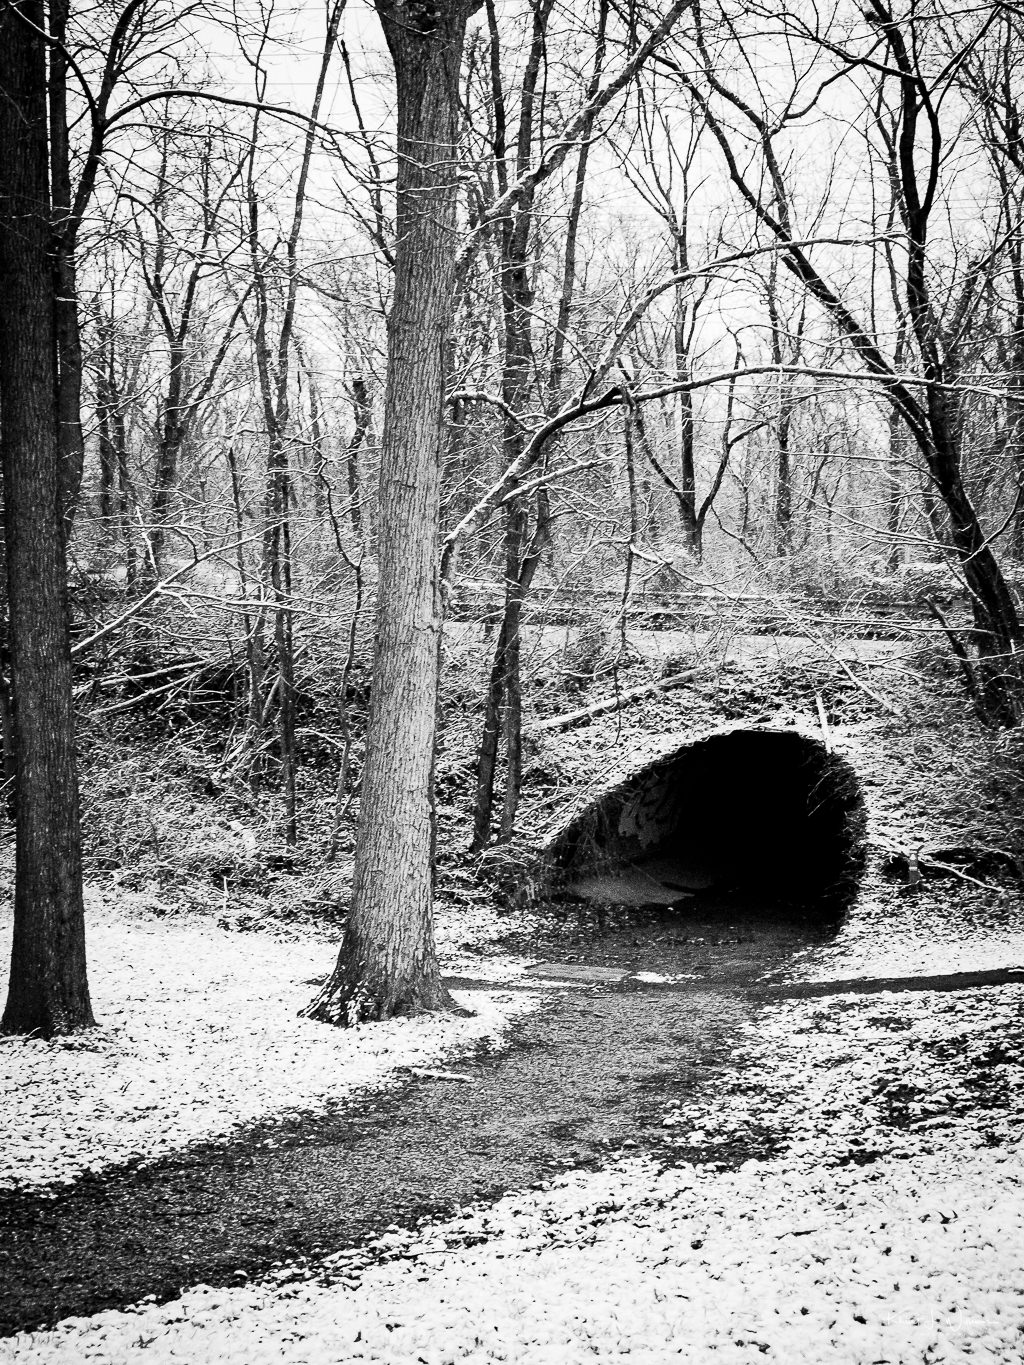 Pathway to a tunnel with snow all around